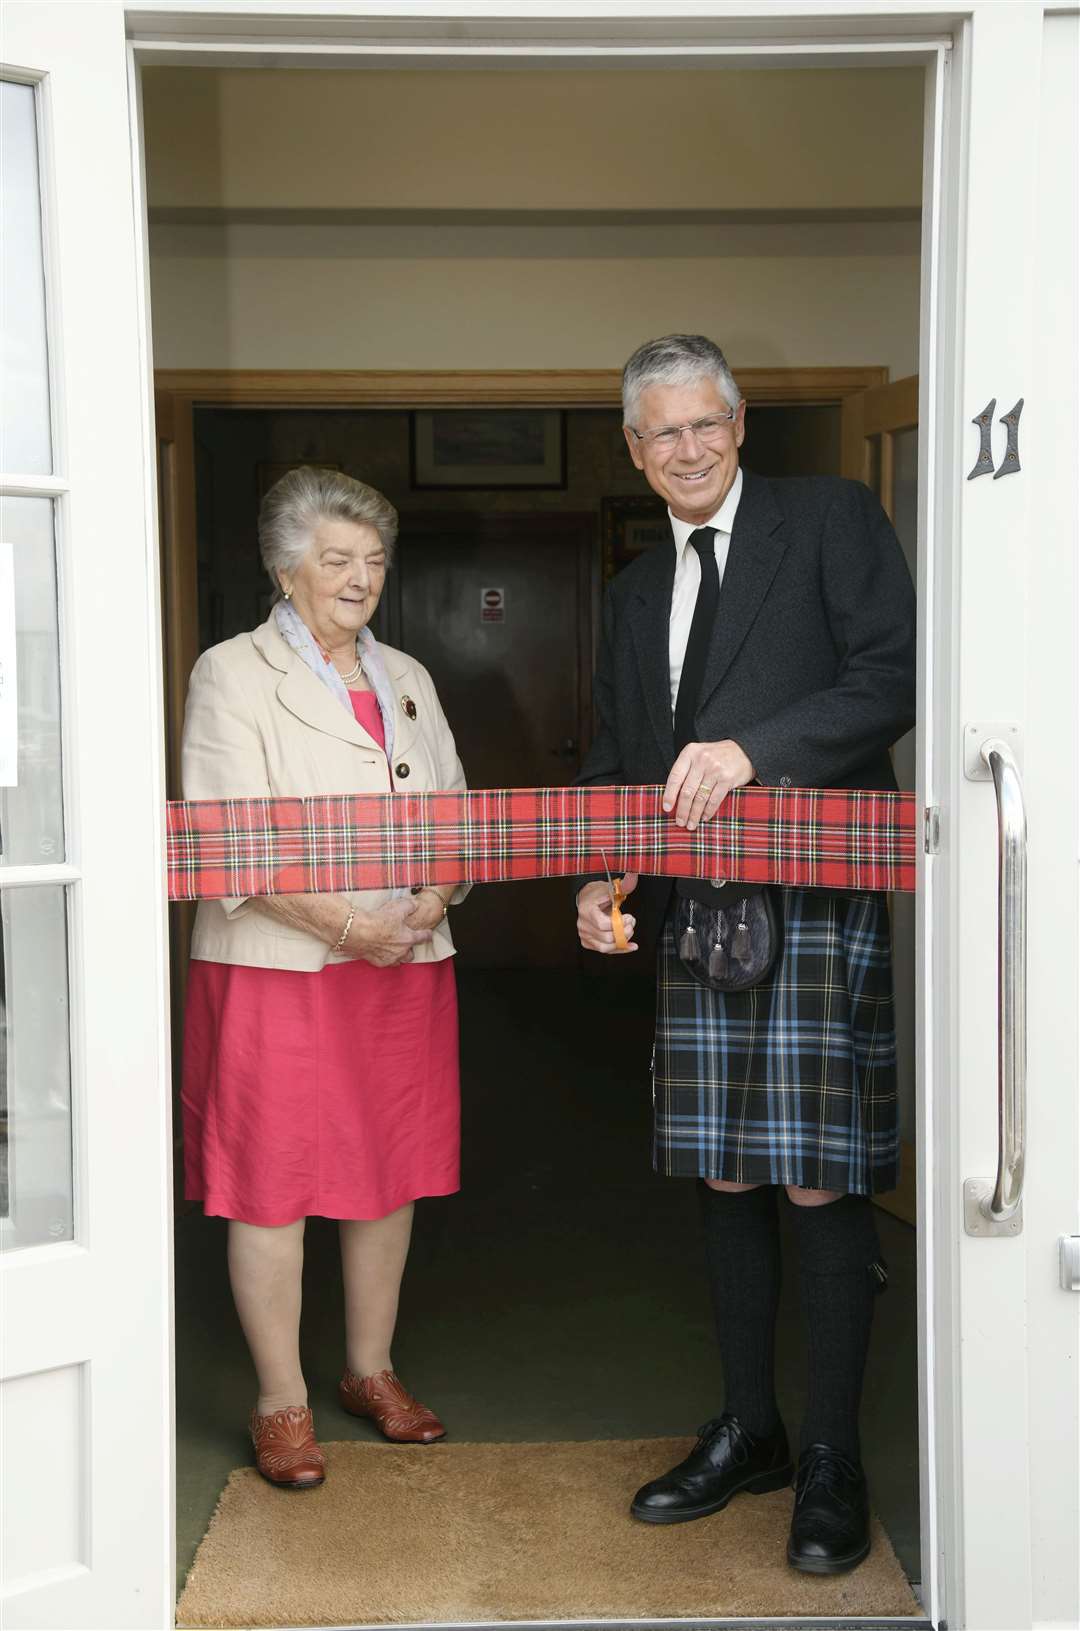 Lord Lieutenant Andrew Simpson cuts the ribbon to officially declare Cullen Heritage Centre open, watched by CDPHG President Brenda Wood. Picture: Beth Taylor